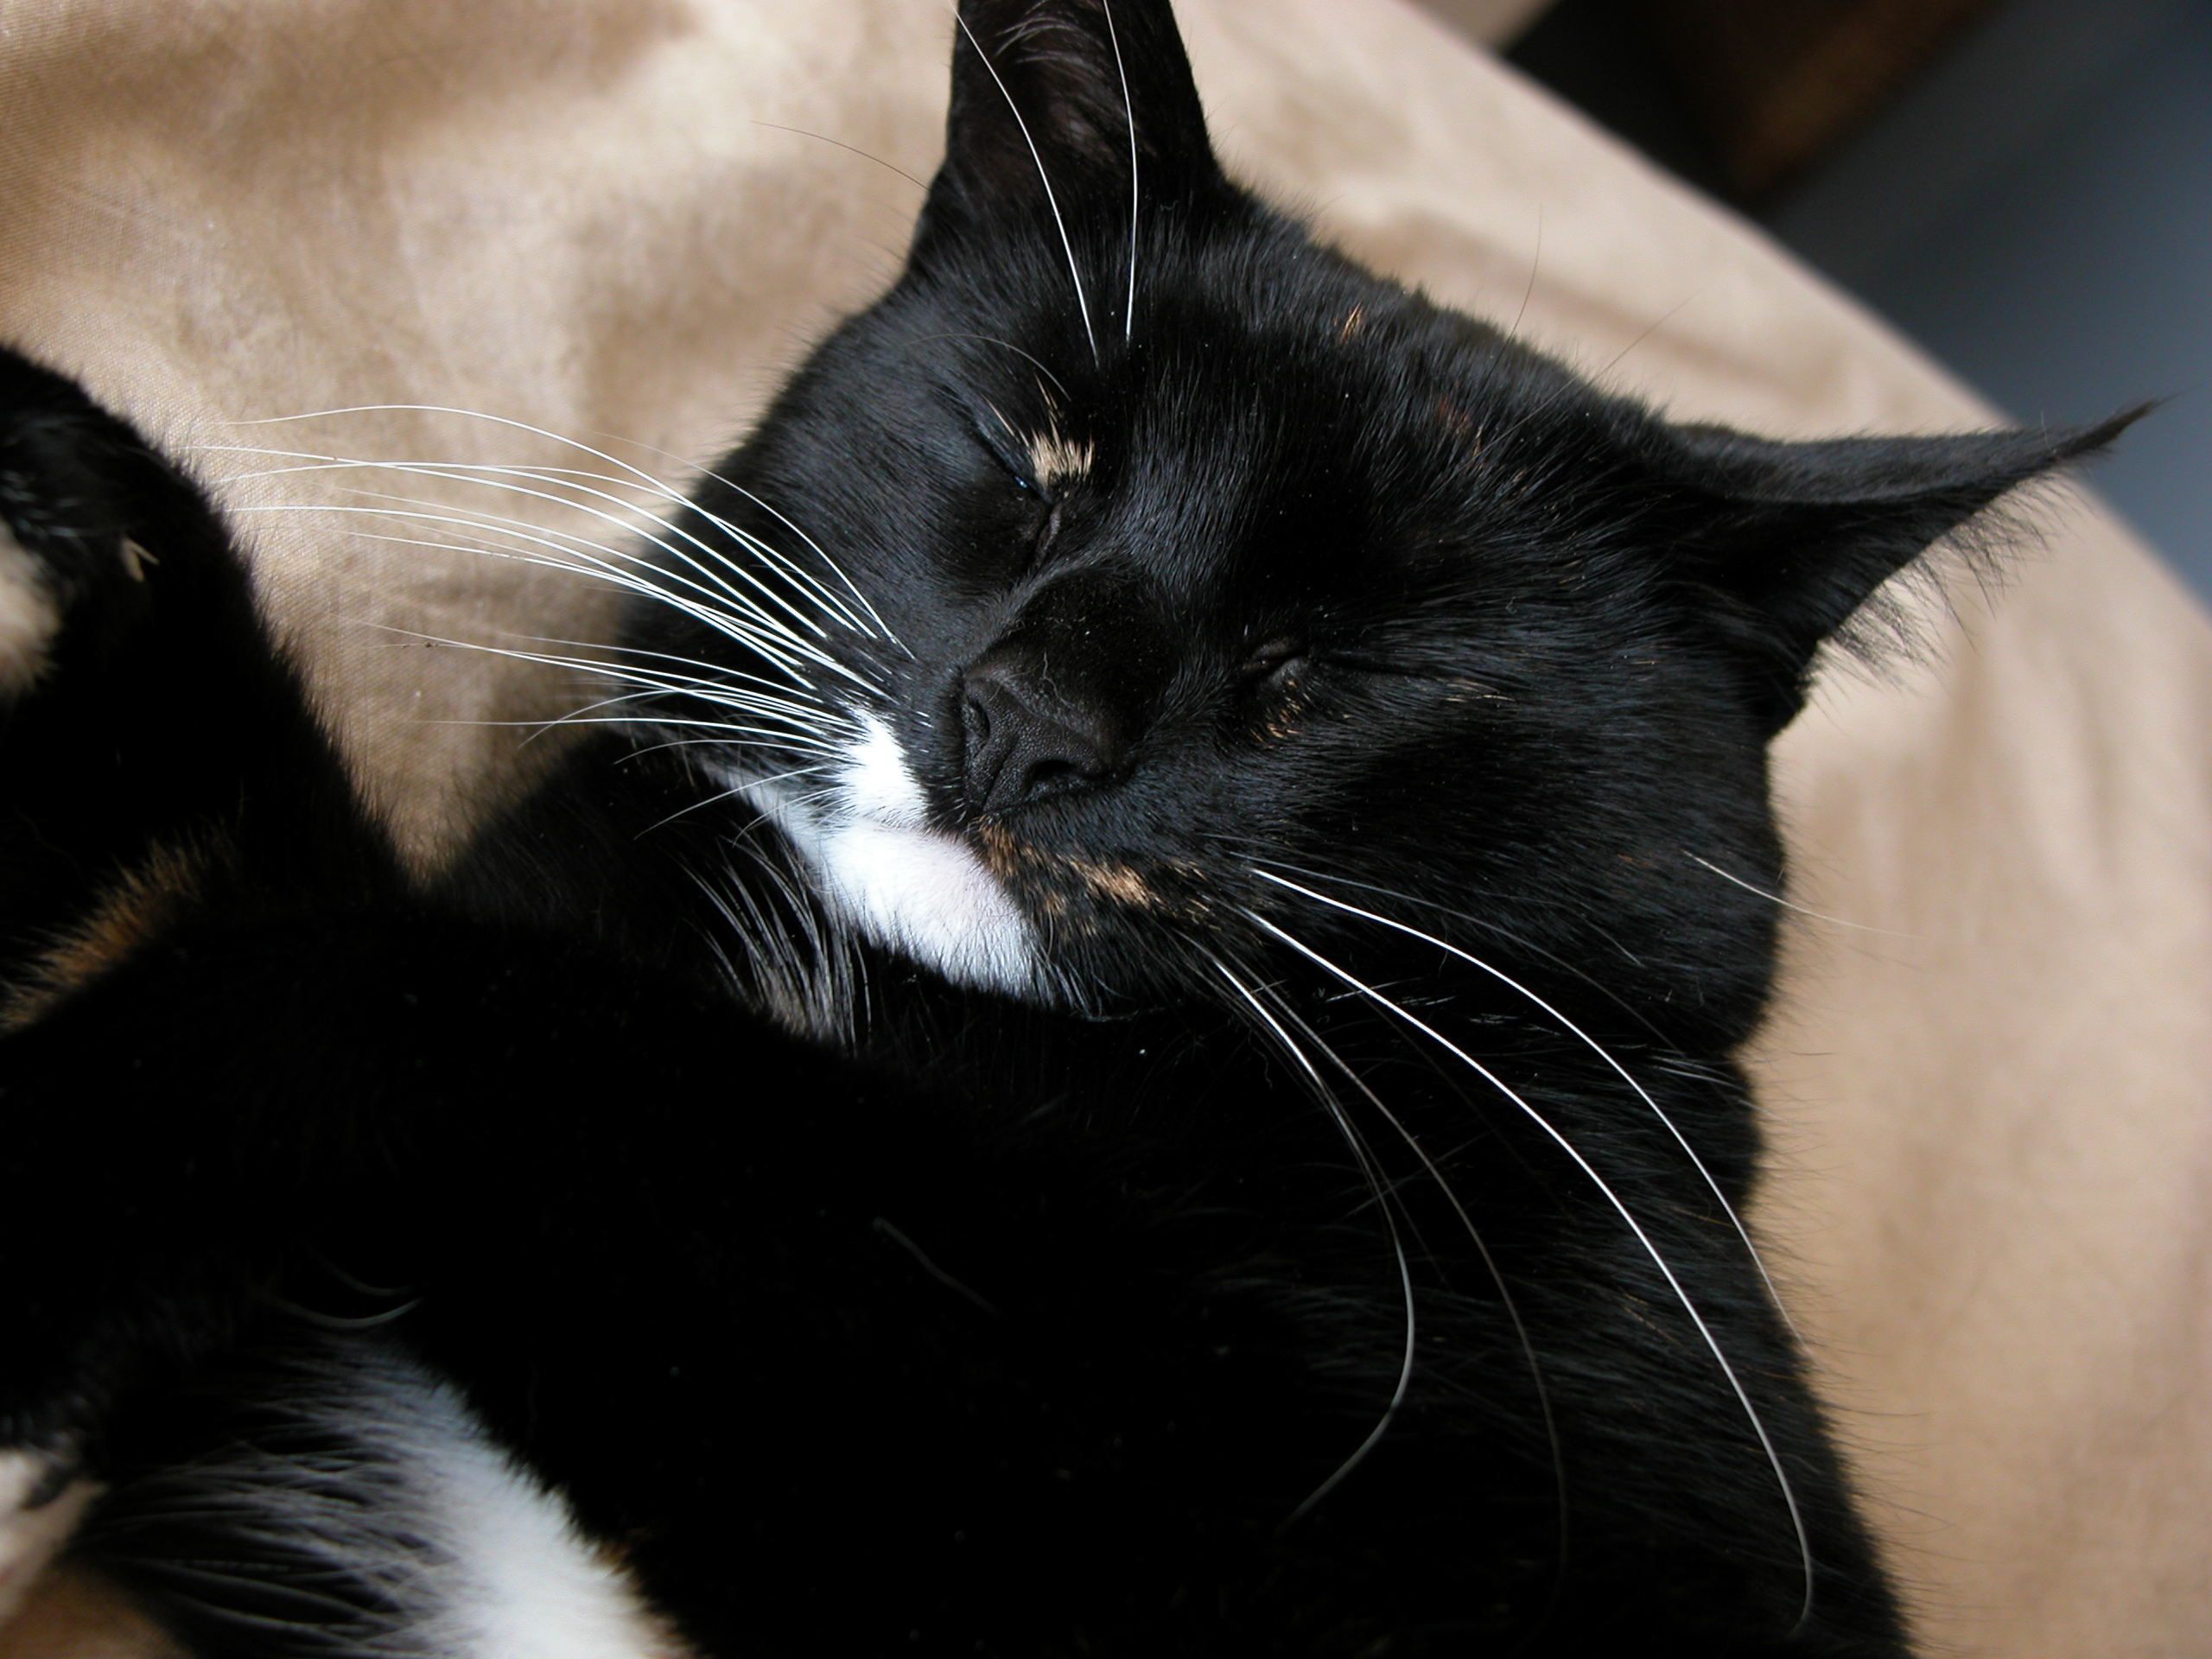 cat black and white cute nostrils ears lying relaxing sleeping